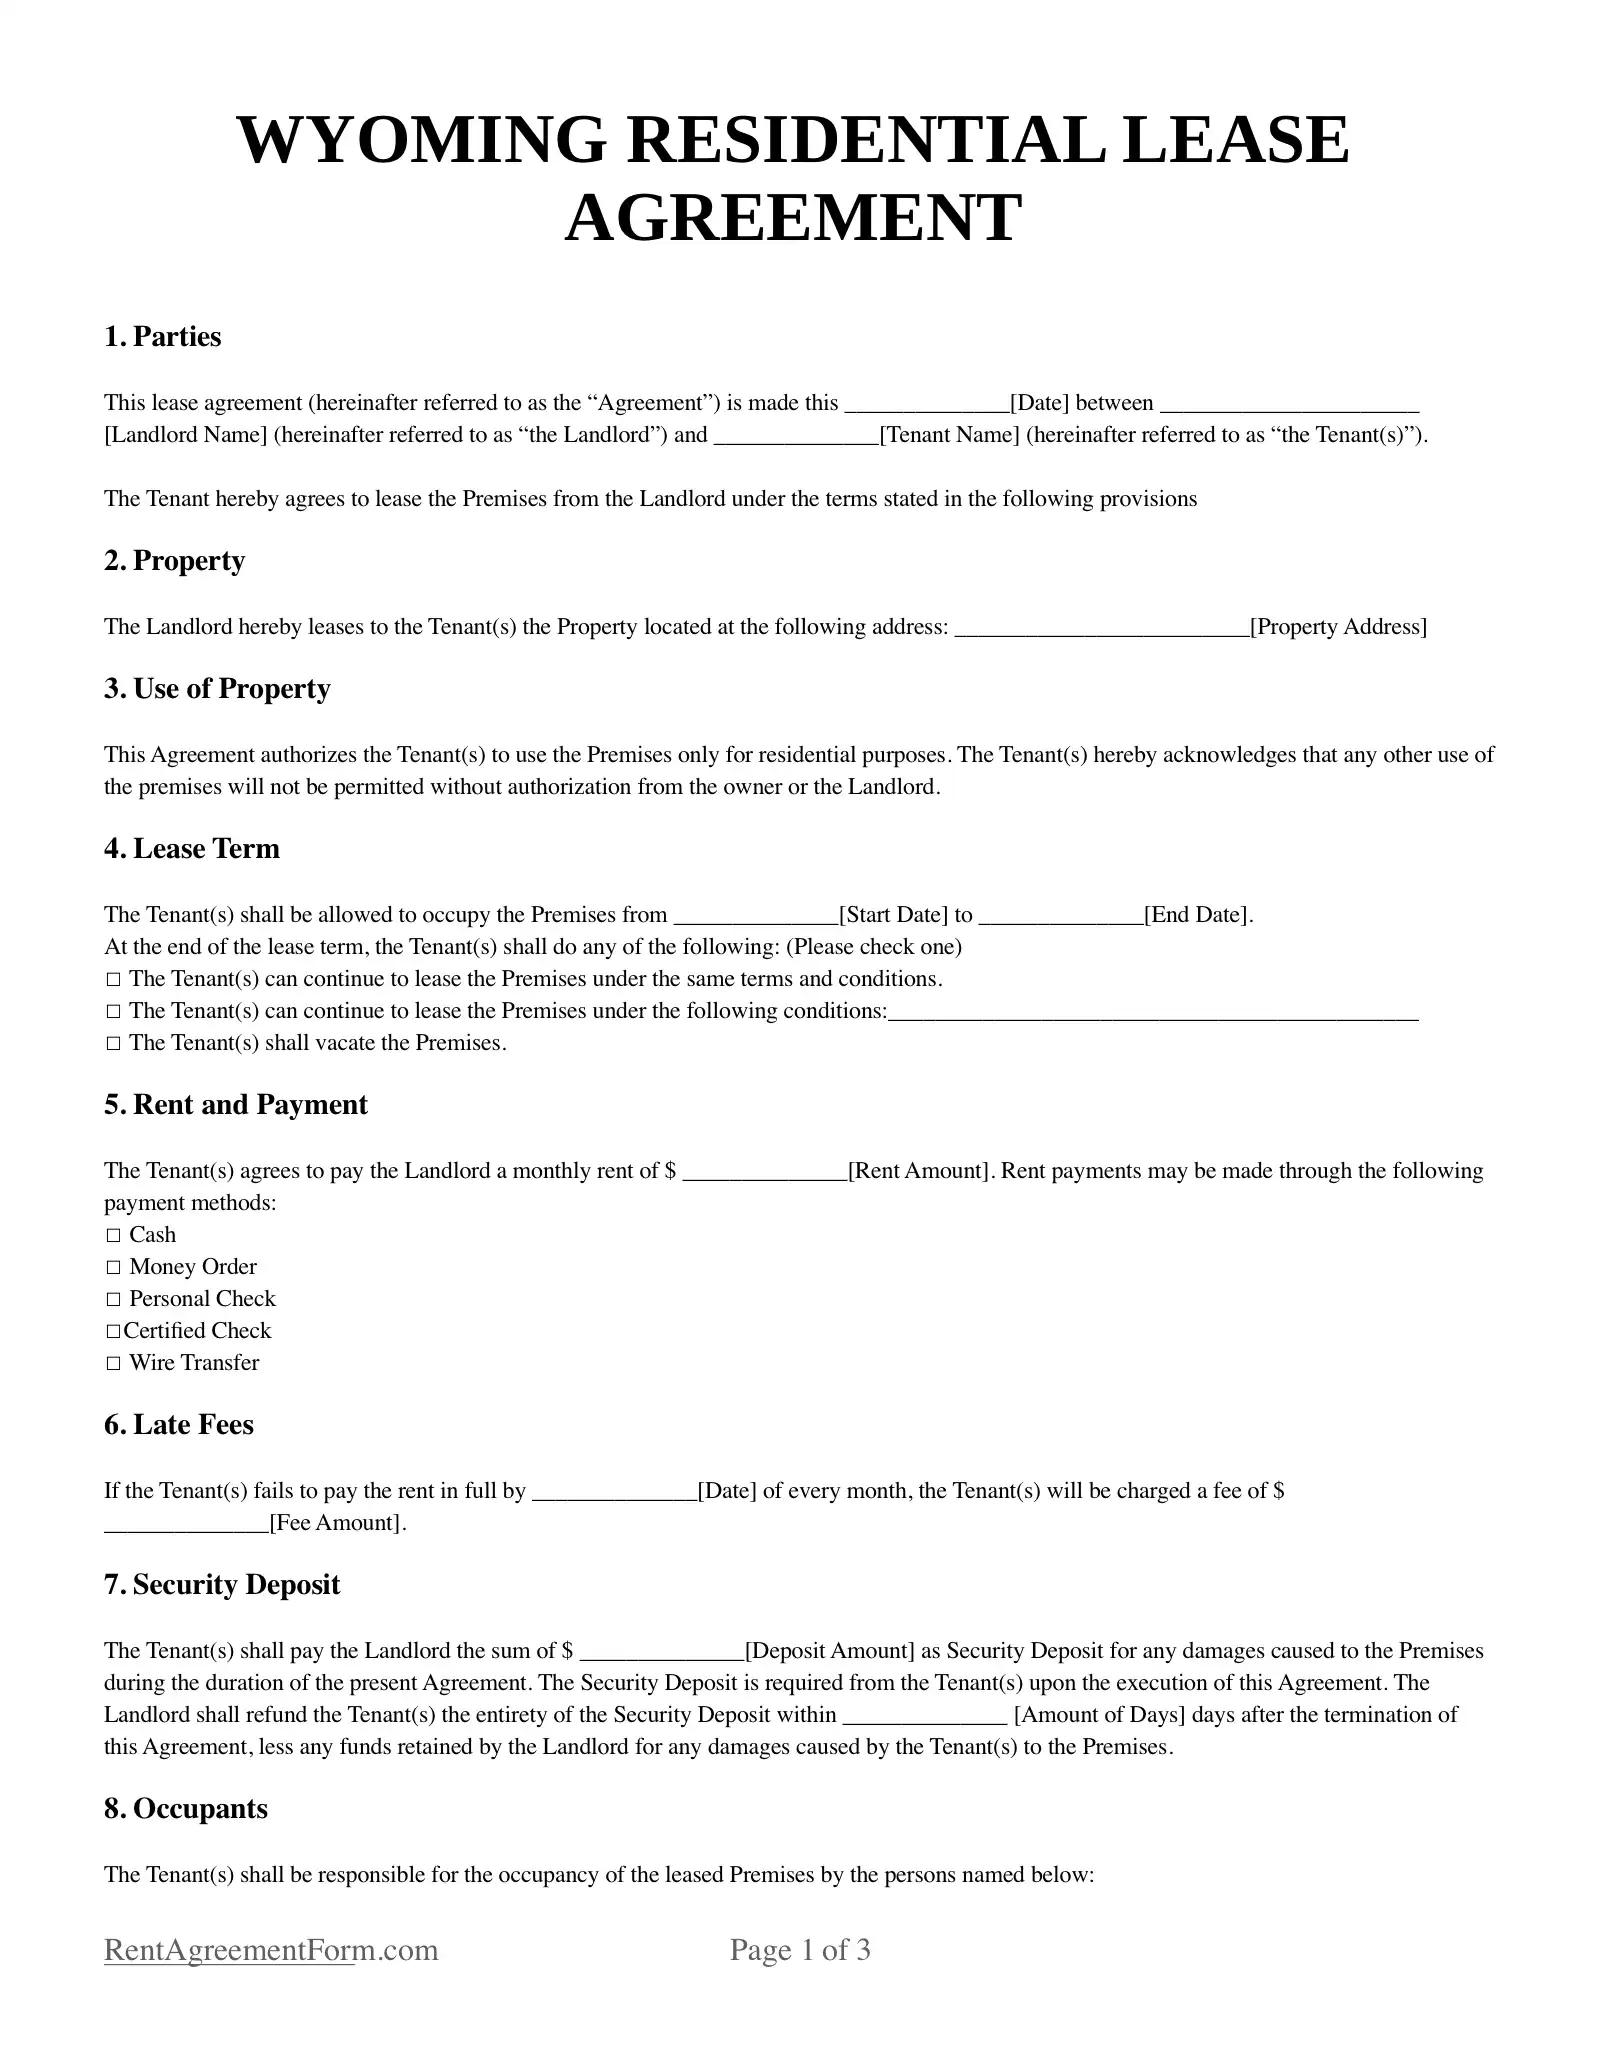 Wyoming Residential Lease Agreement Sample